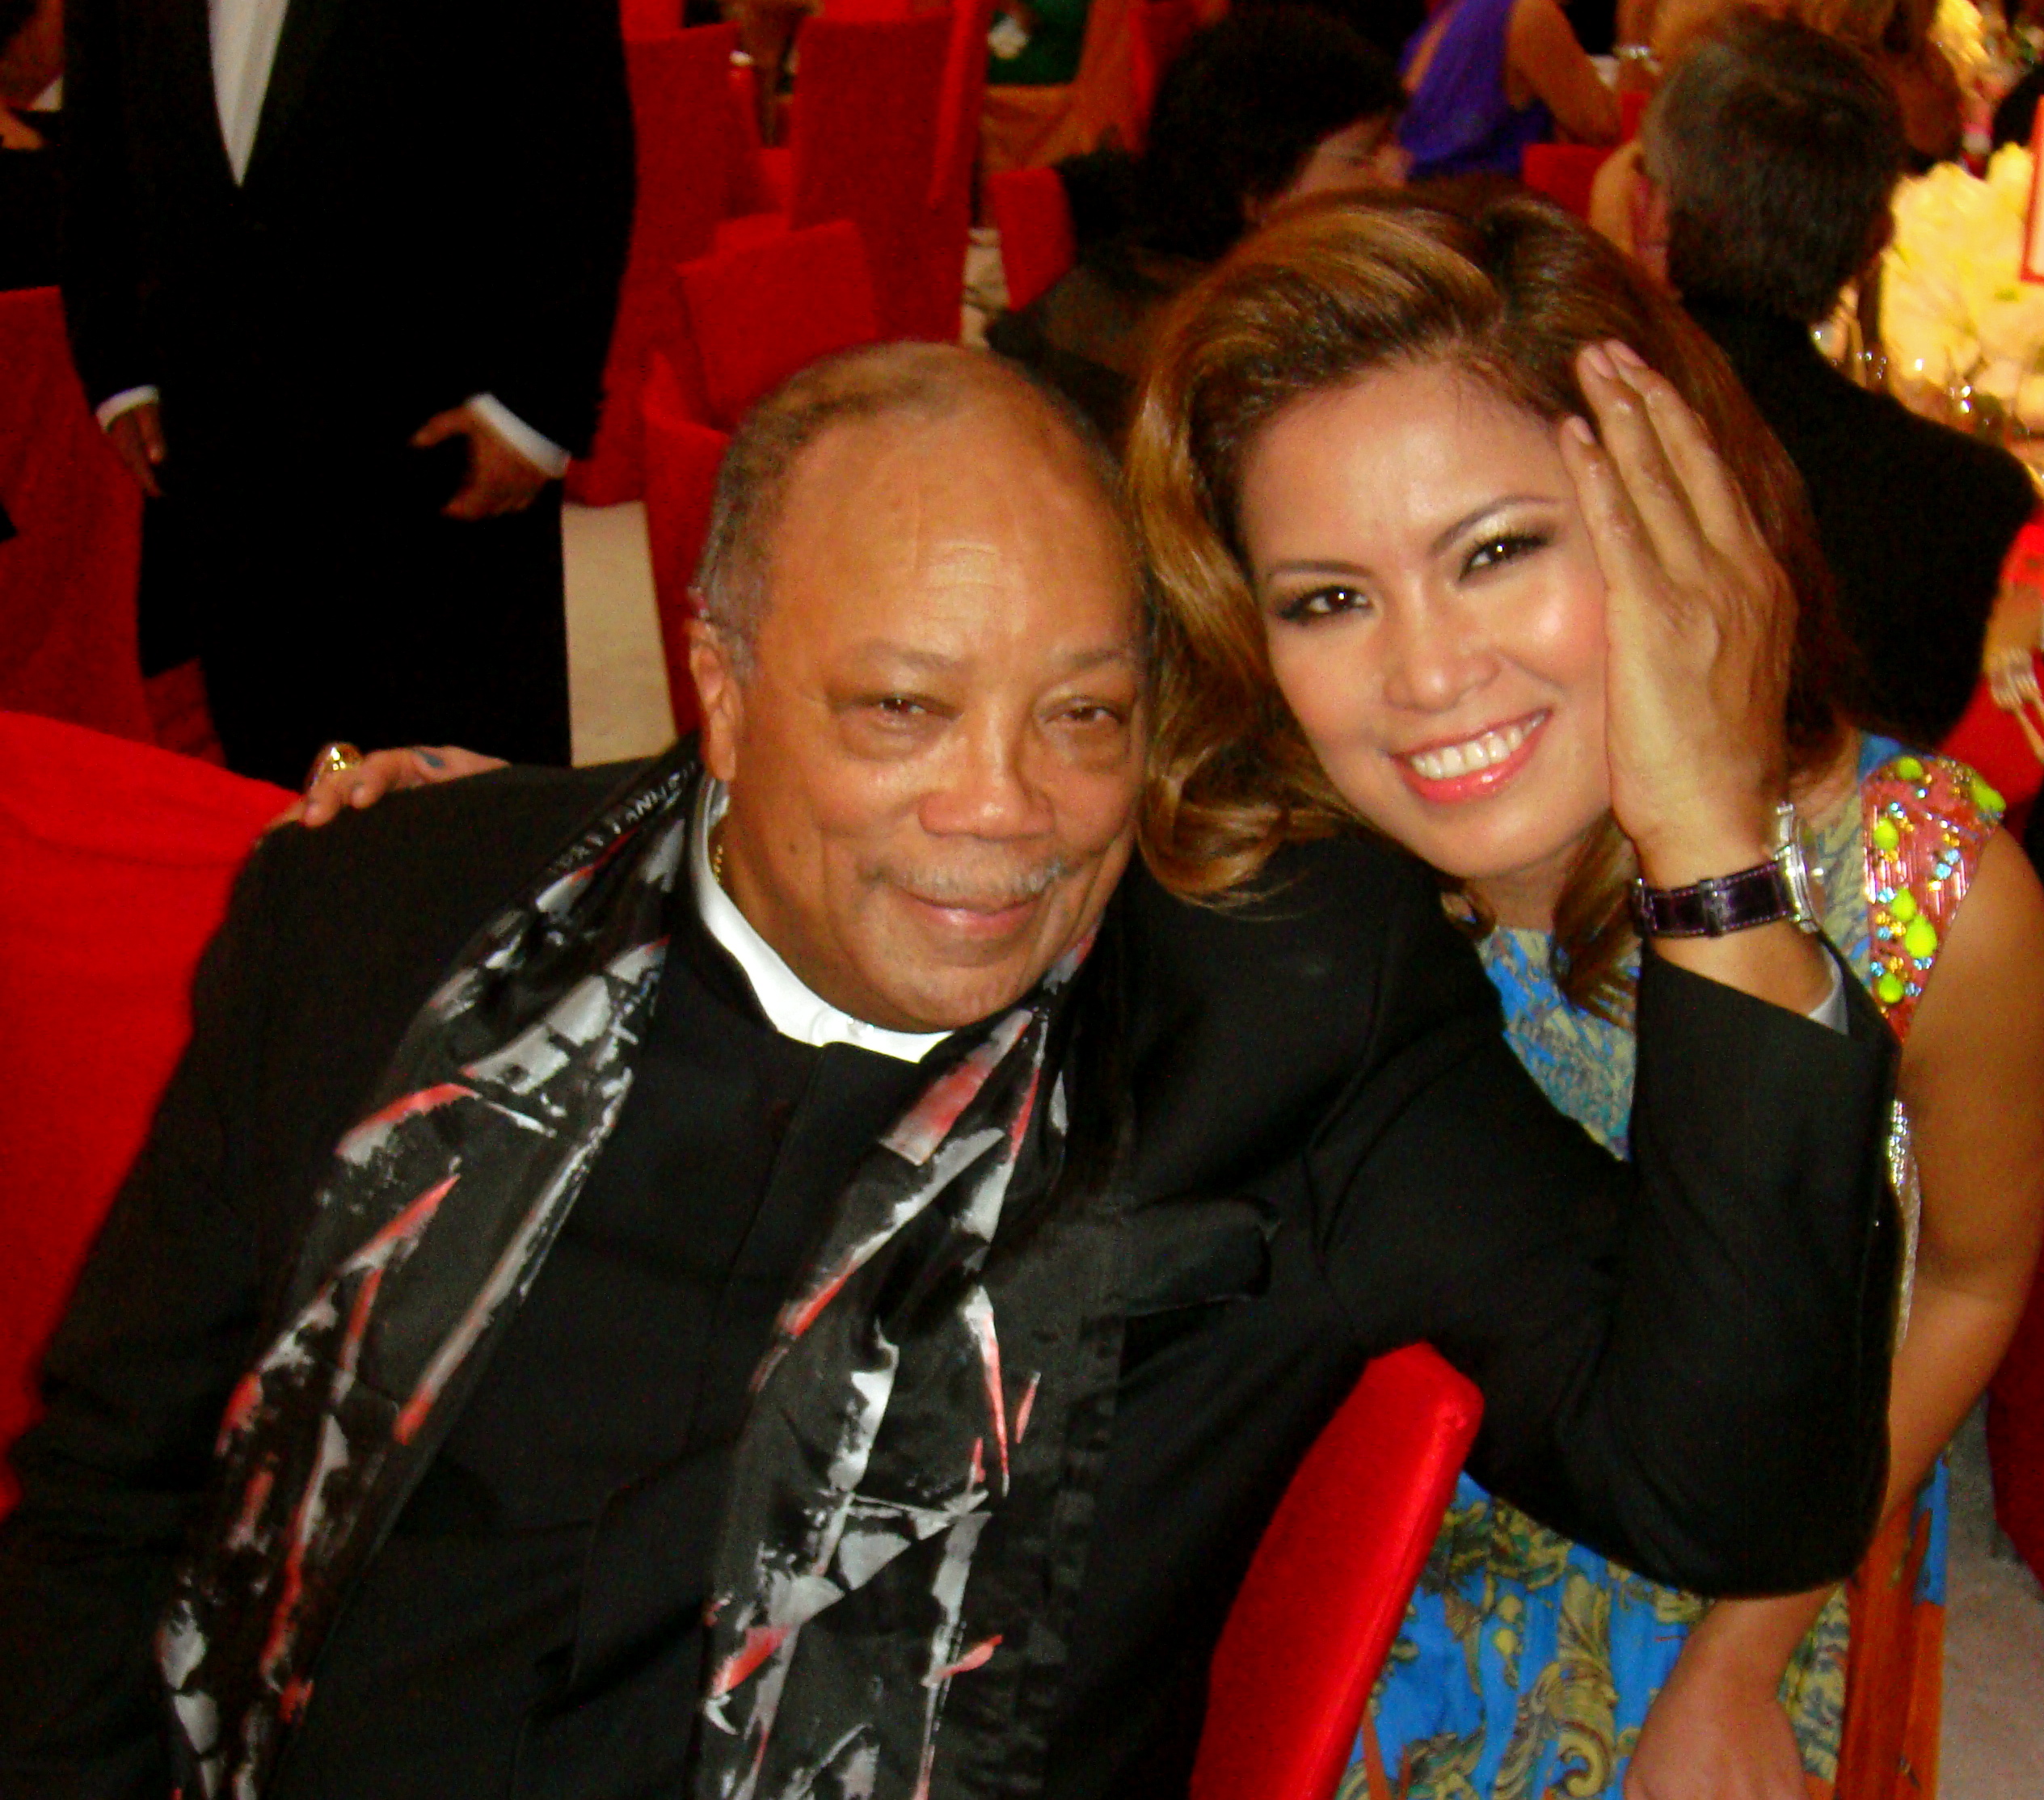 Recording artist Zarah and Quincy Jones at the 21st Annual EJAF Oscar Viewing Party.